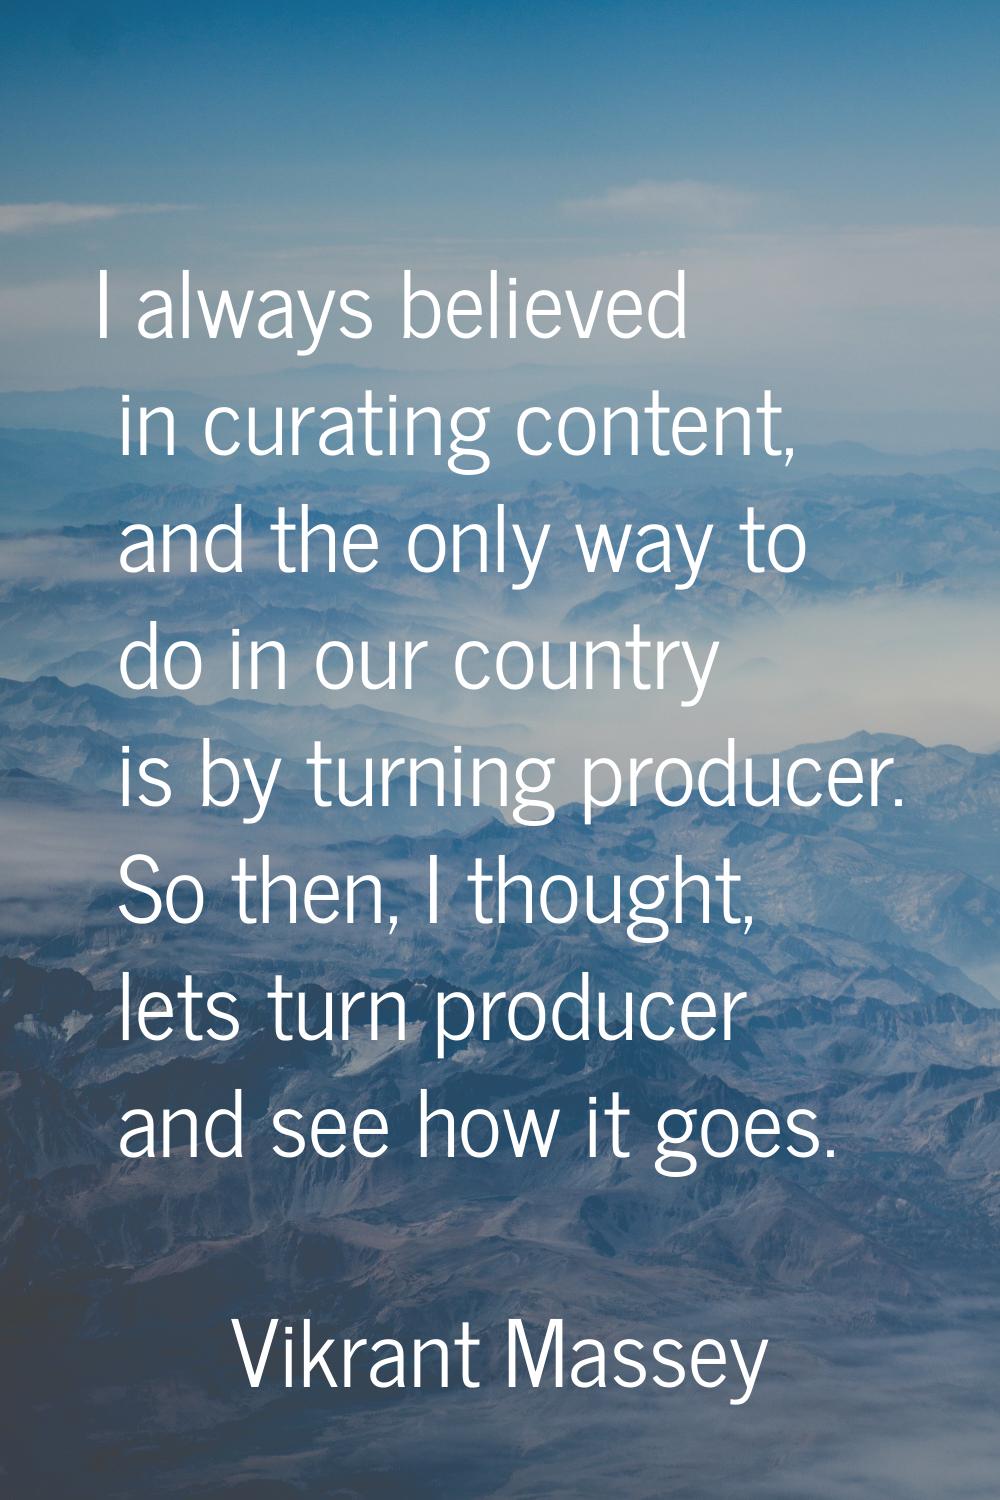 I always believed in curating content, and the only way to do in our country is by turning producer